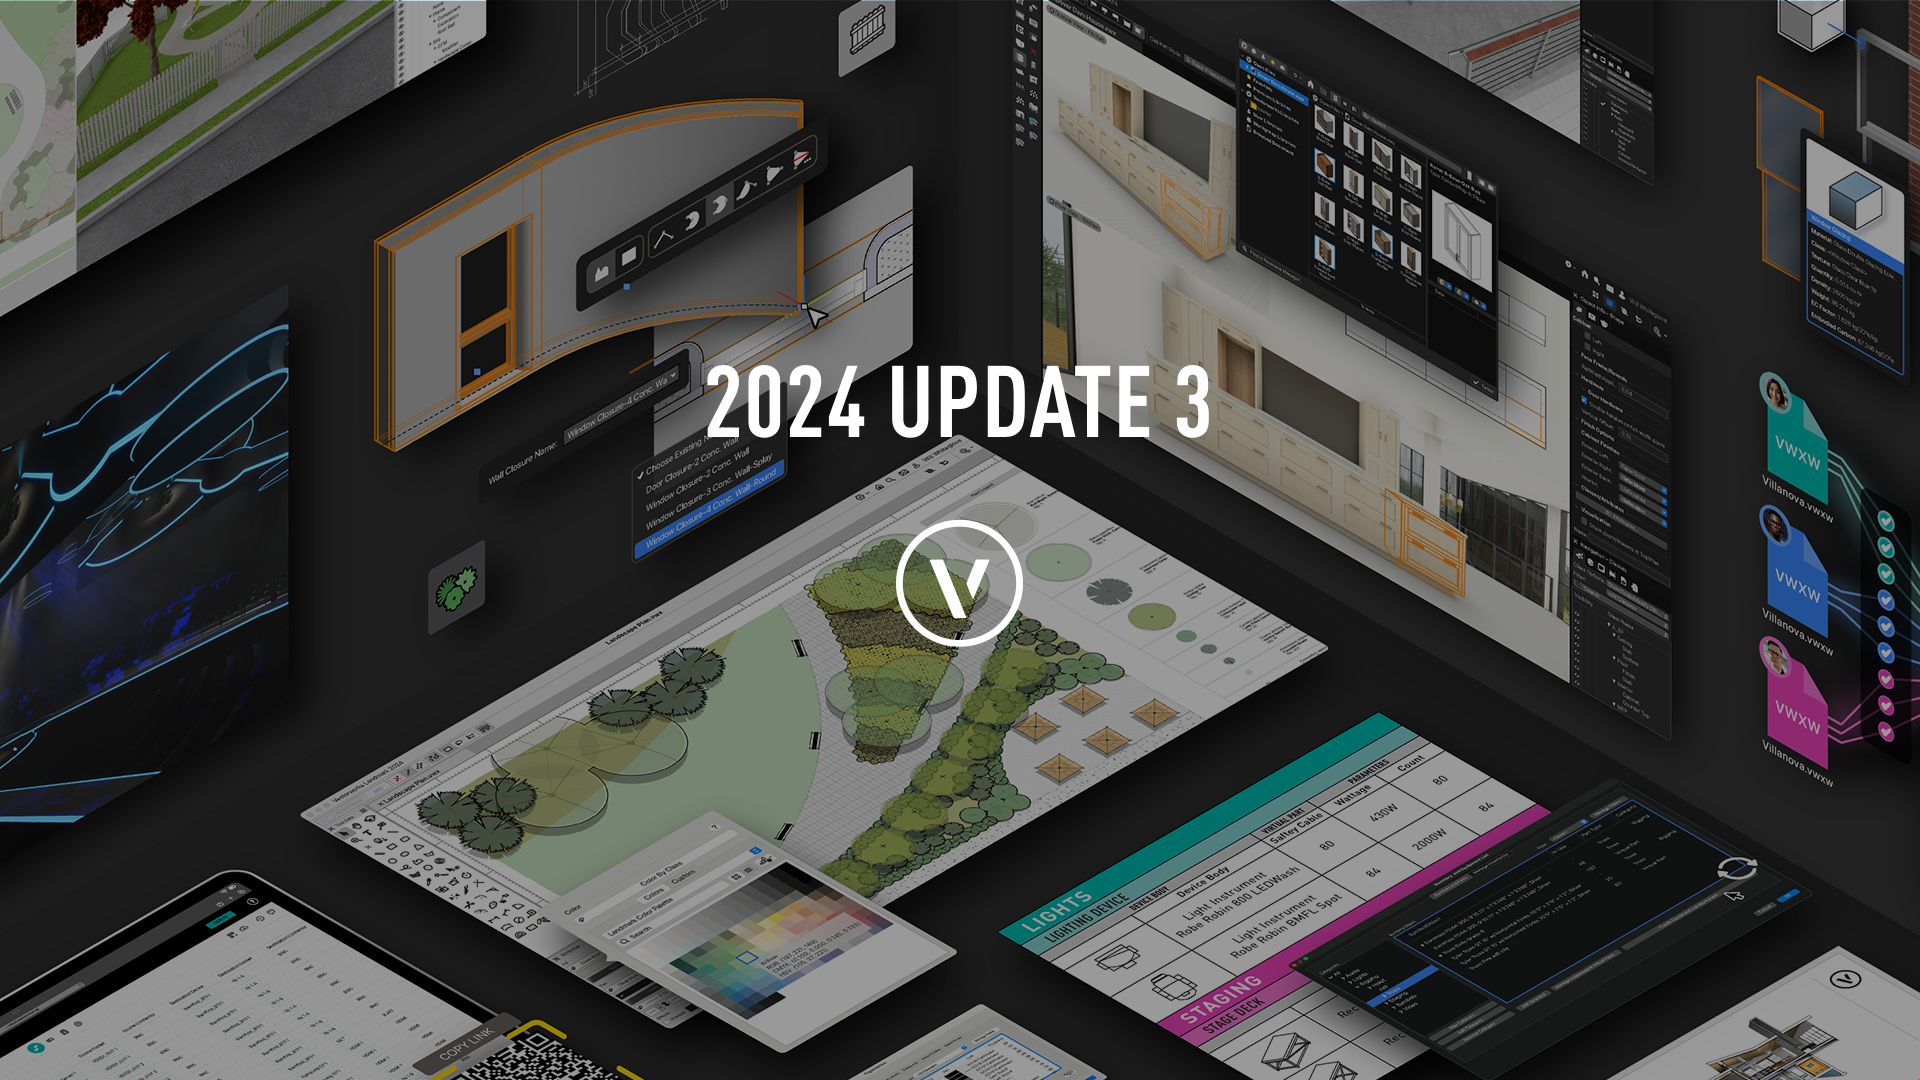 Vectorworks 2024 Update 3 Blooming With Possibilities For Designers